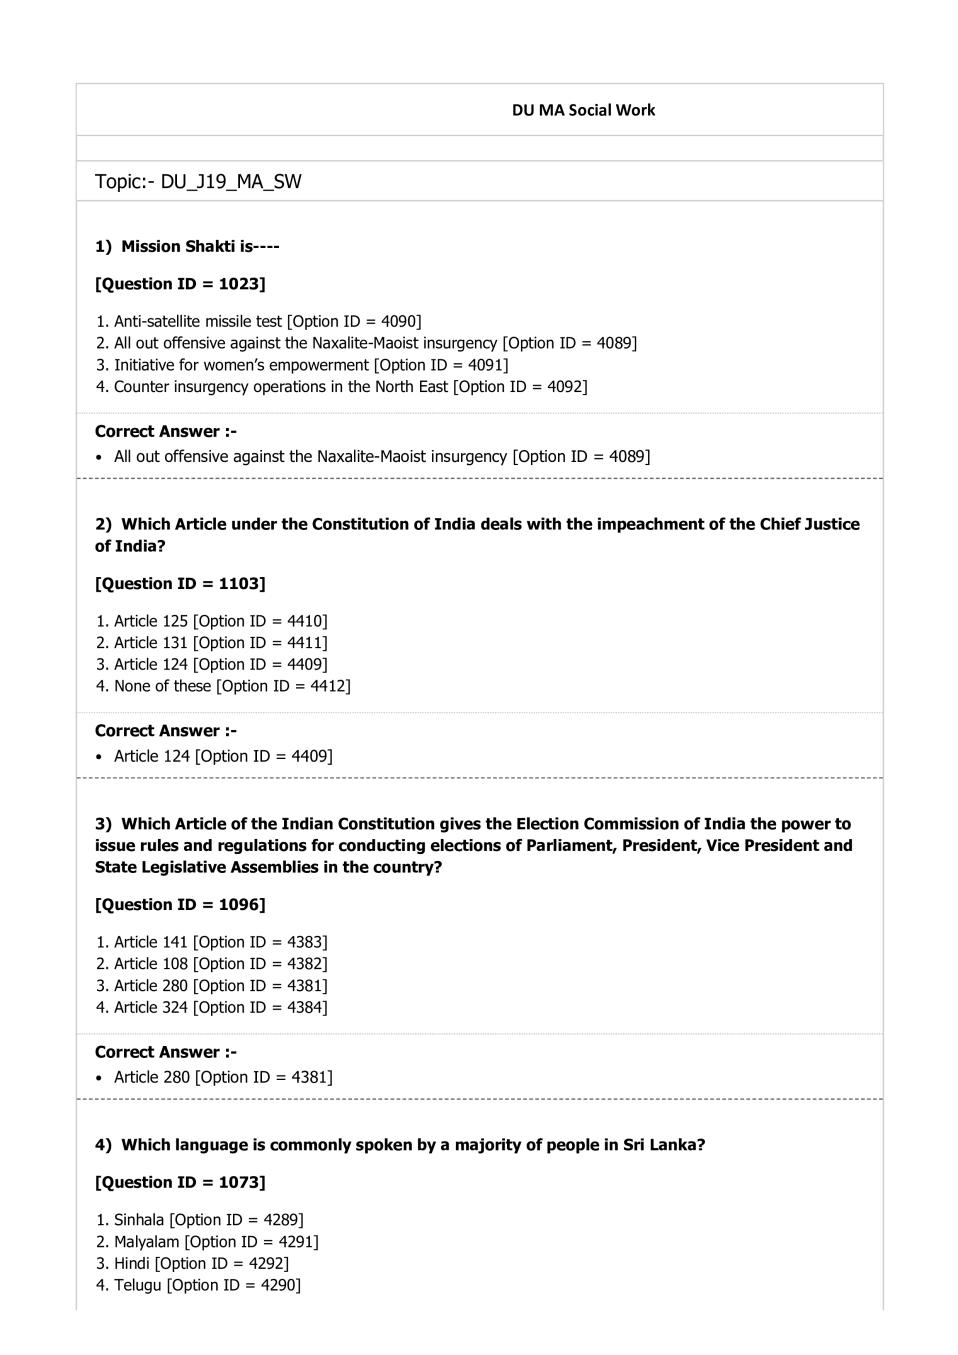 DUET Question Paper 2019 for M.A Social Work - Page 1